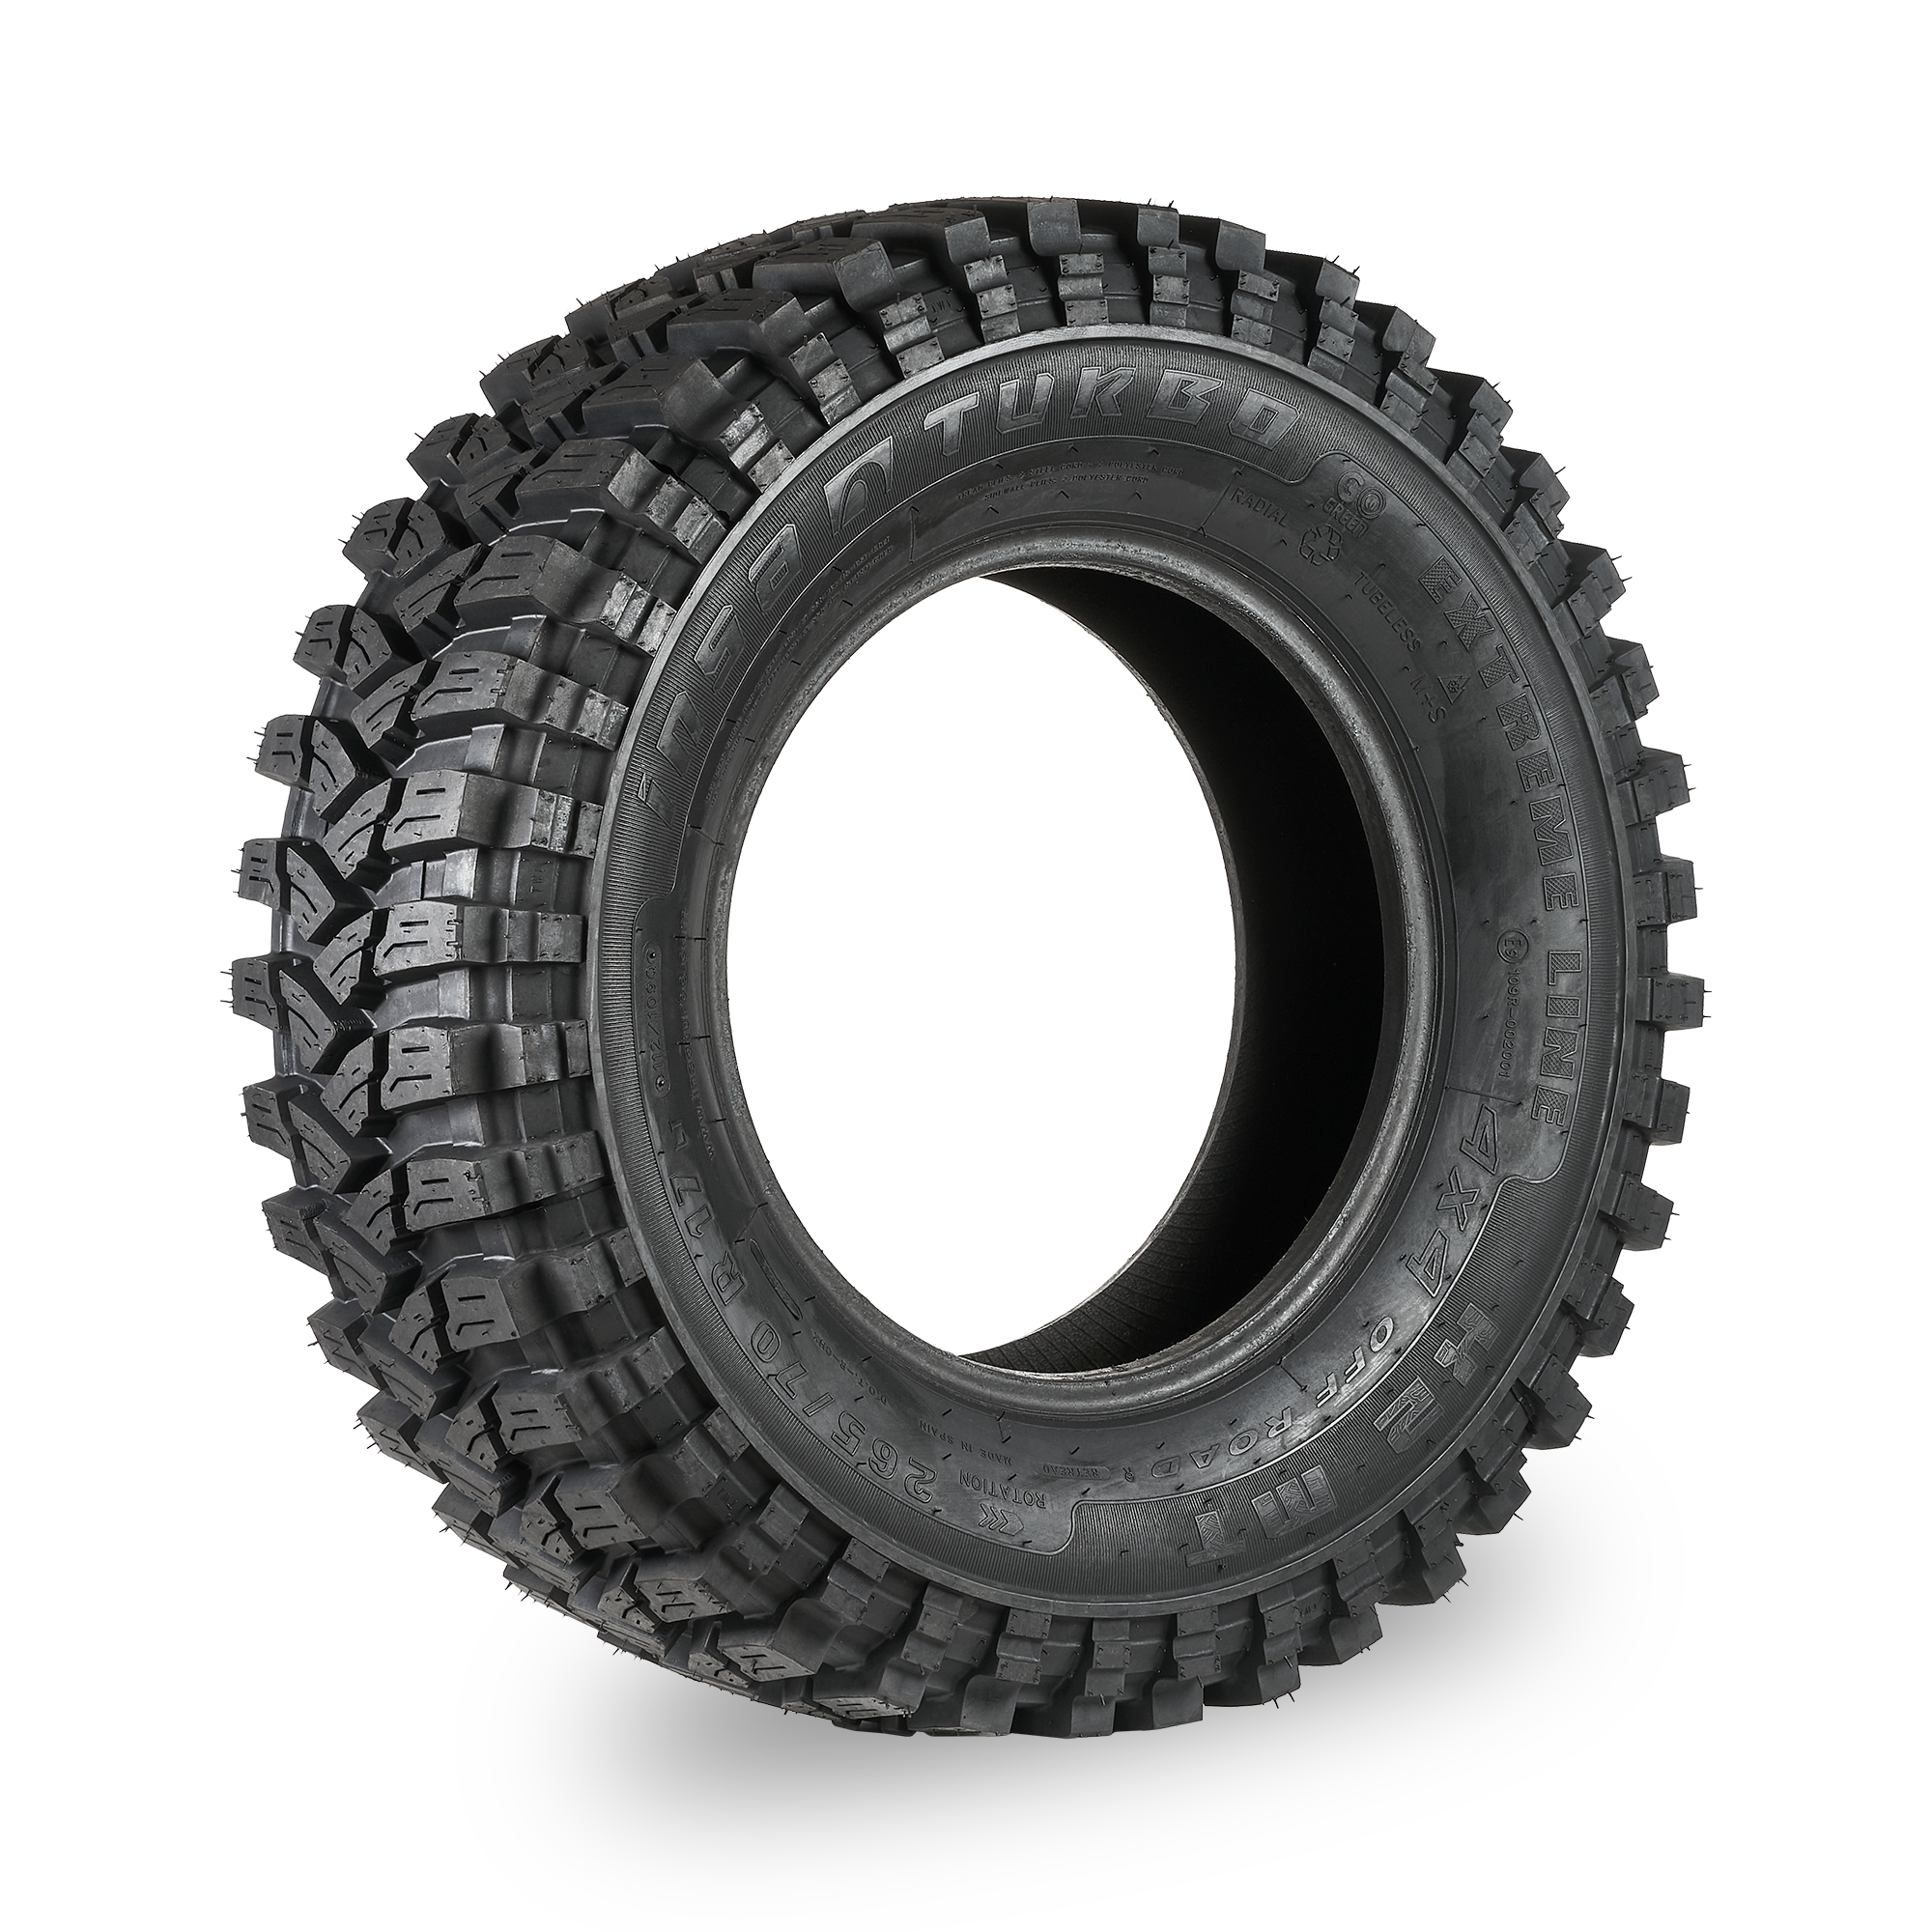 a picture of the product Insa Turbo tyres, K2 Mud terrain Insa turbo K2